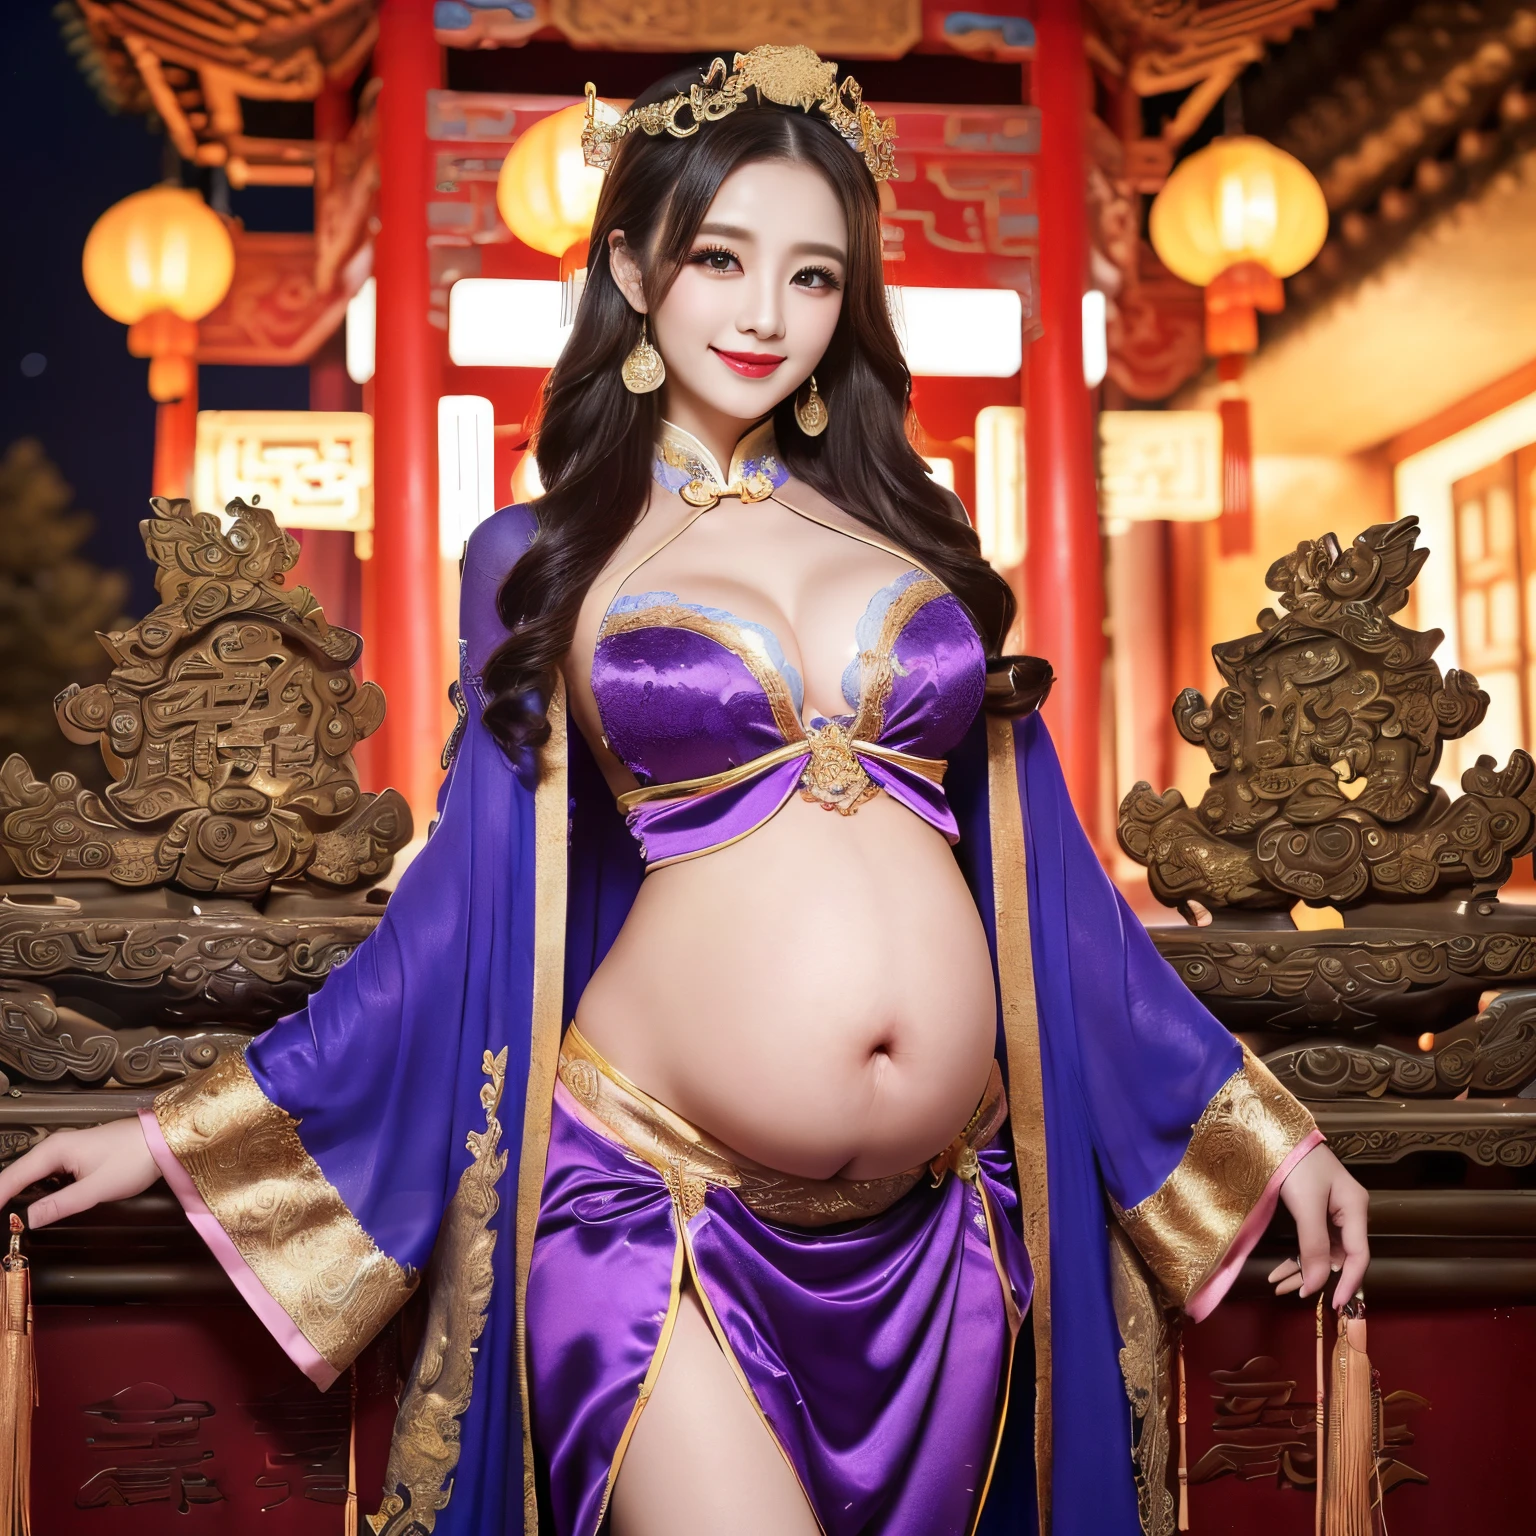 top-quality、masutepiece、8K、Top image quality、Highly complex and detailed  depictions))、(Chinese prostitute upper body photo:1.3)、Luxurious medieval  Chinese whorehouse、the most luxurious prostitute costume、((The most  beautiful medieval Chinese